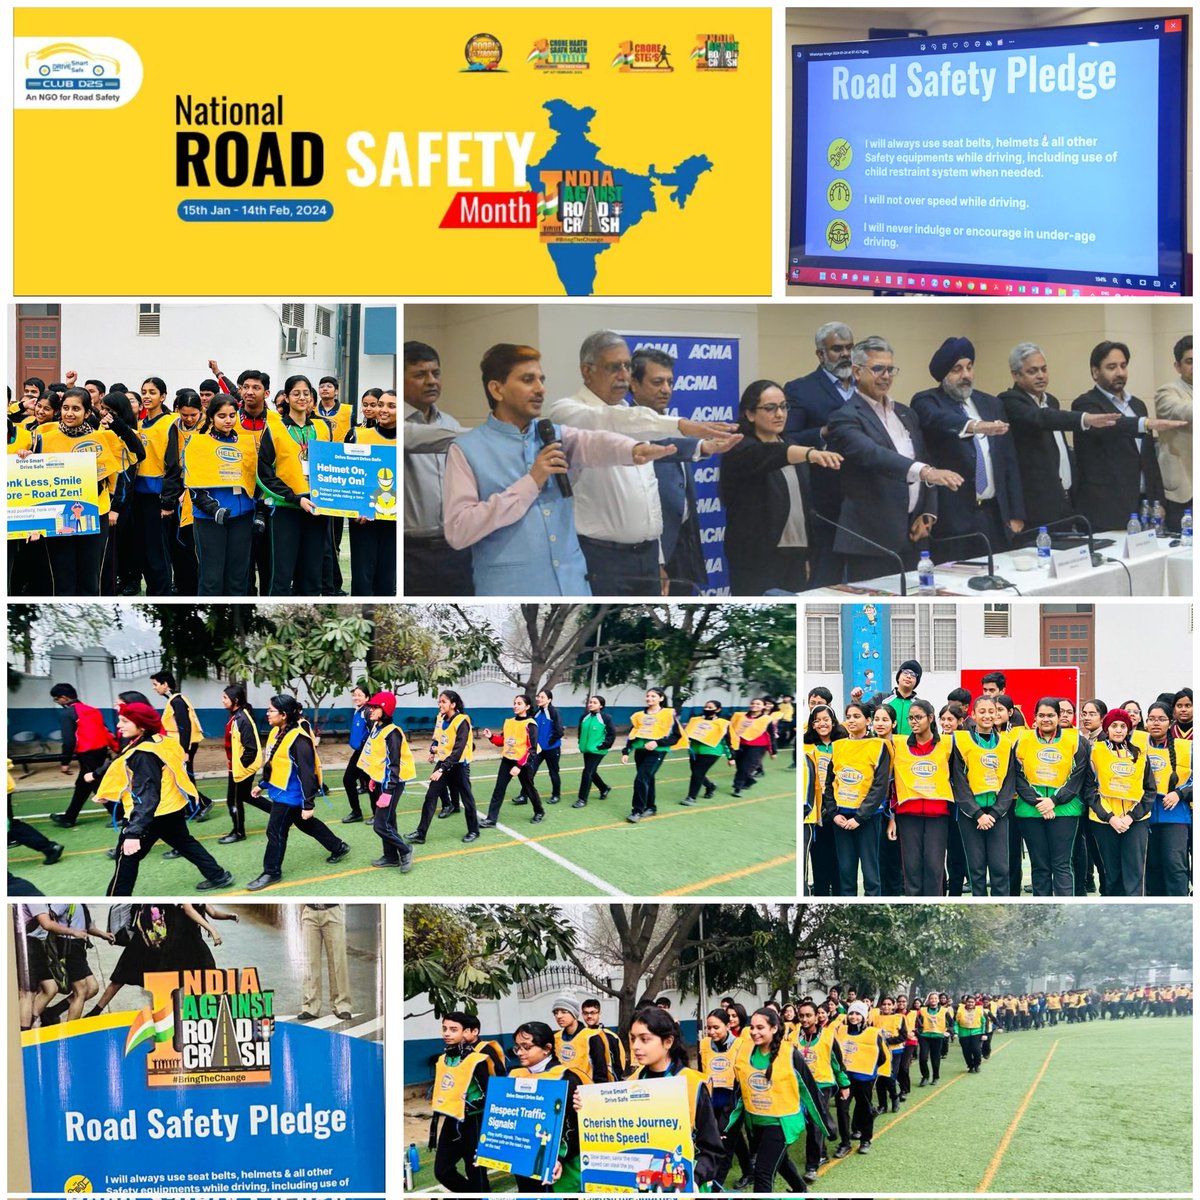 #Call2Action on this year's #National #RoadSafety Month (and then to next month...), #NRSM2024, Let's #BeTheChange, when we change, we inspire others to Change.

The chain of #Pledge, #Commitment, #Monitoring and #SelfEnforcent to respect #LifeSaving protocols, the #8Point